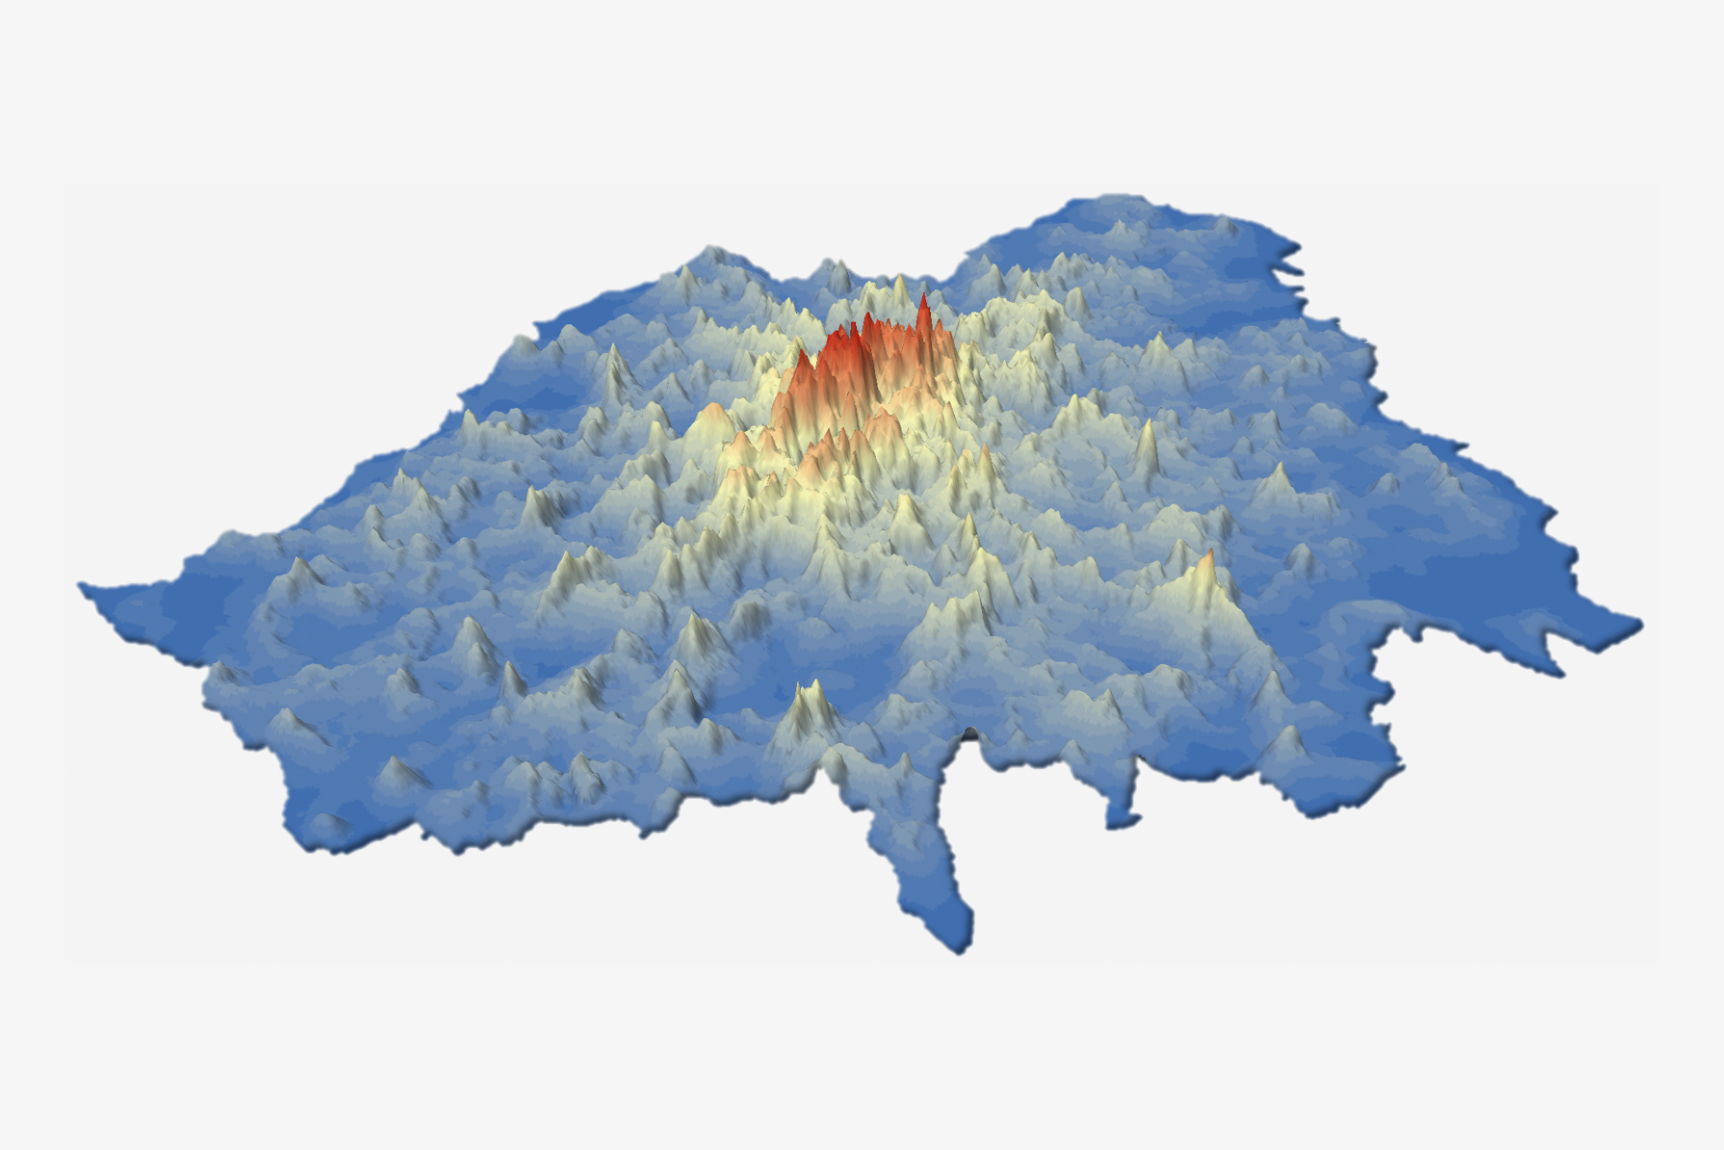 3D relief map of London, with red peaks towards centre, yellow areas around that, and blue areas towards the outskirts.